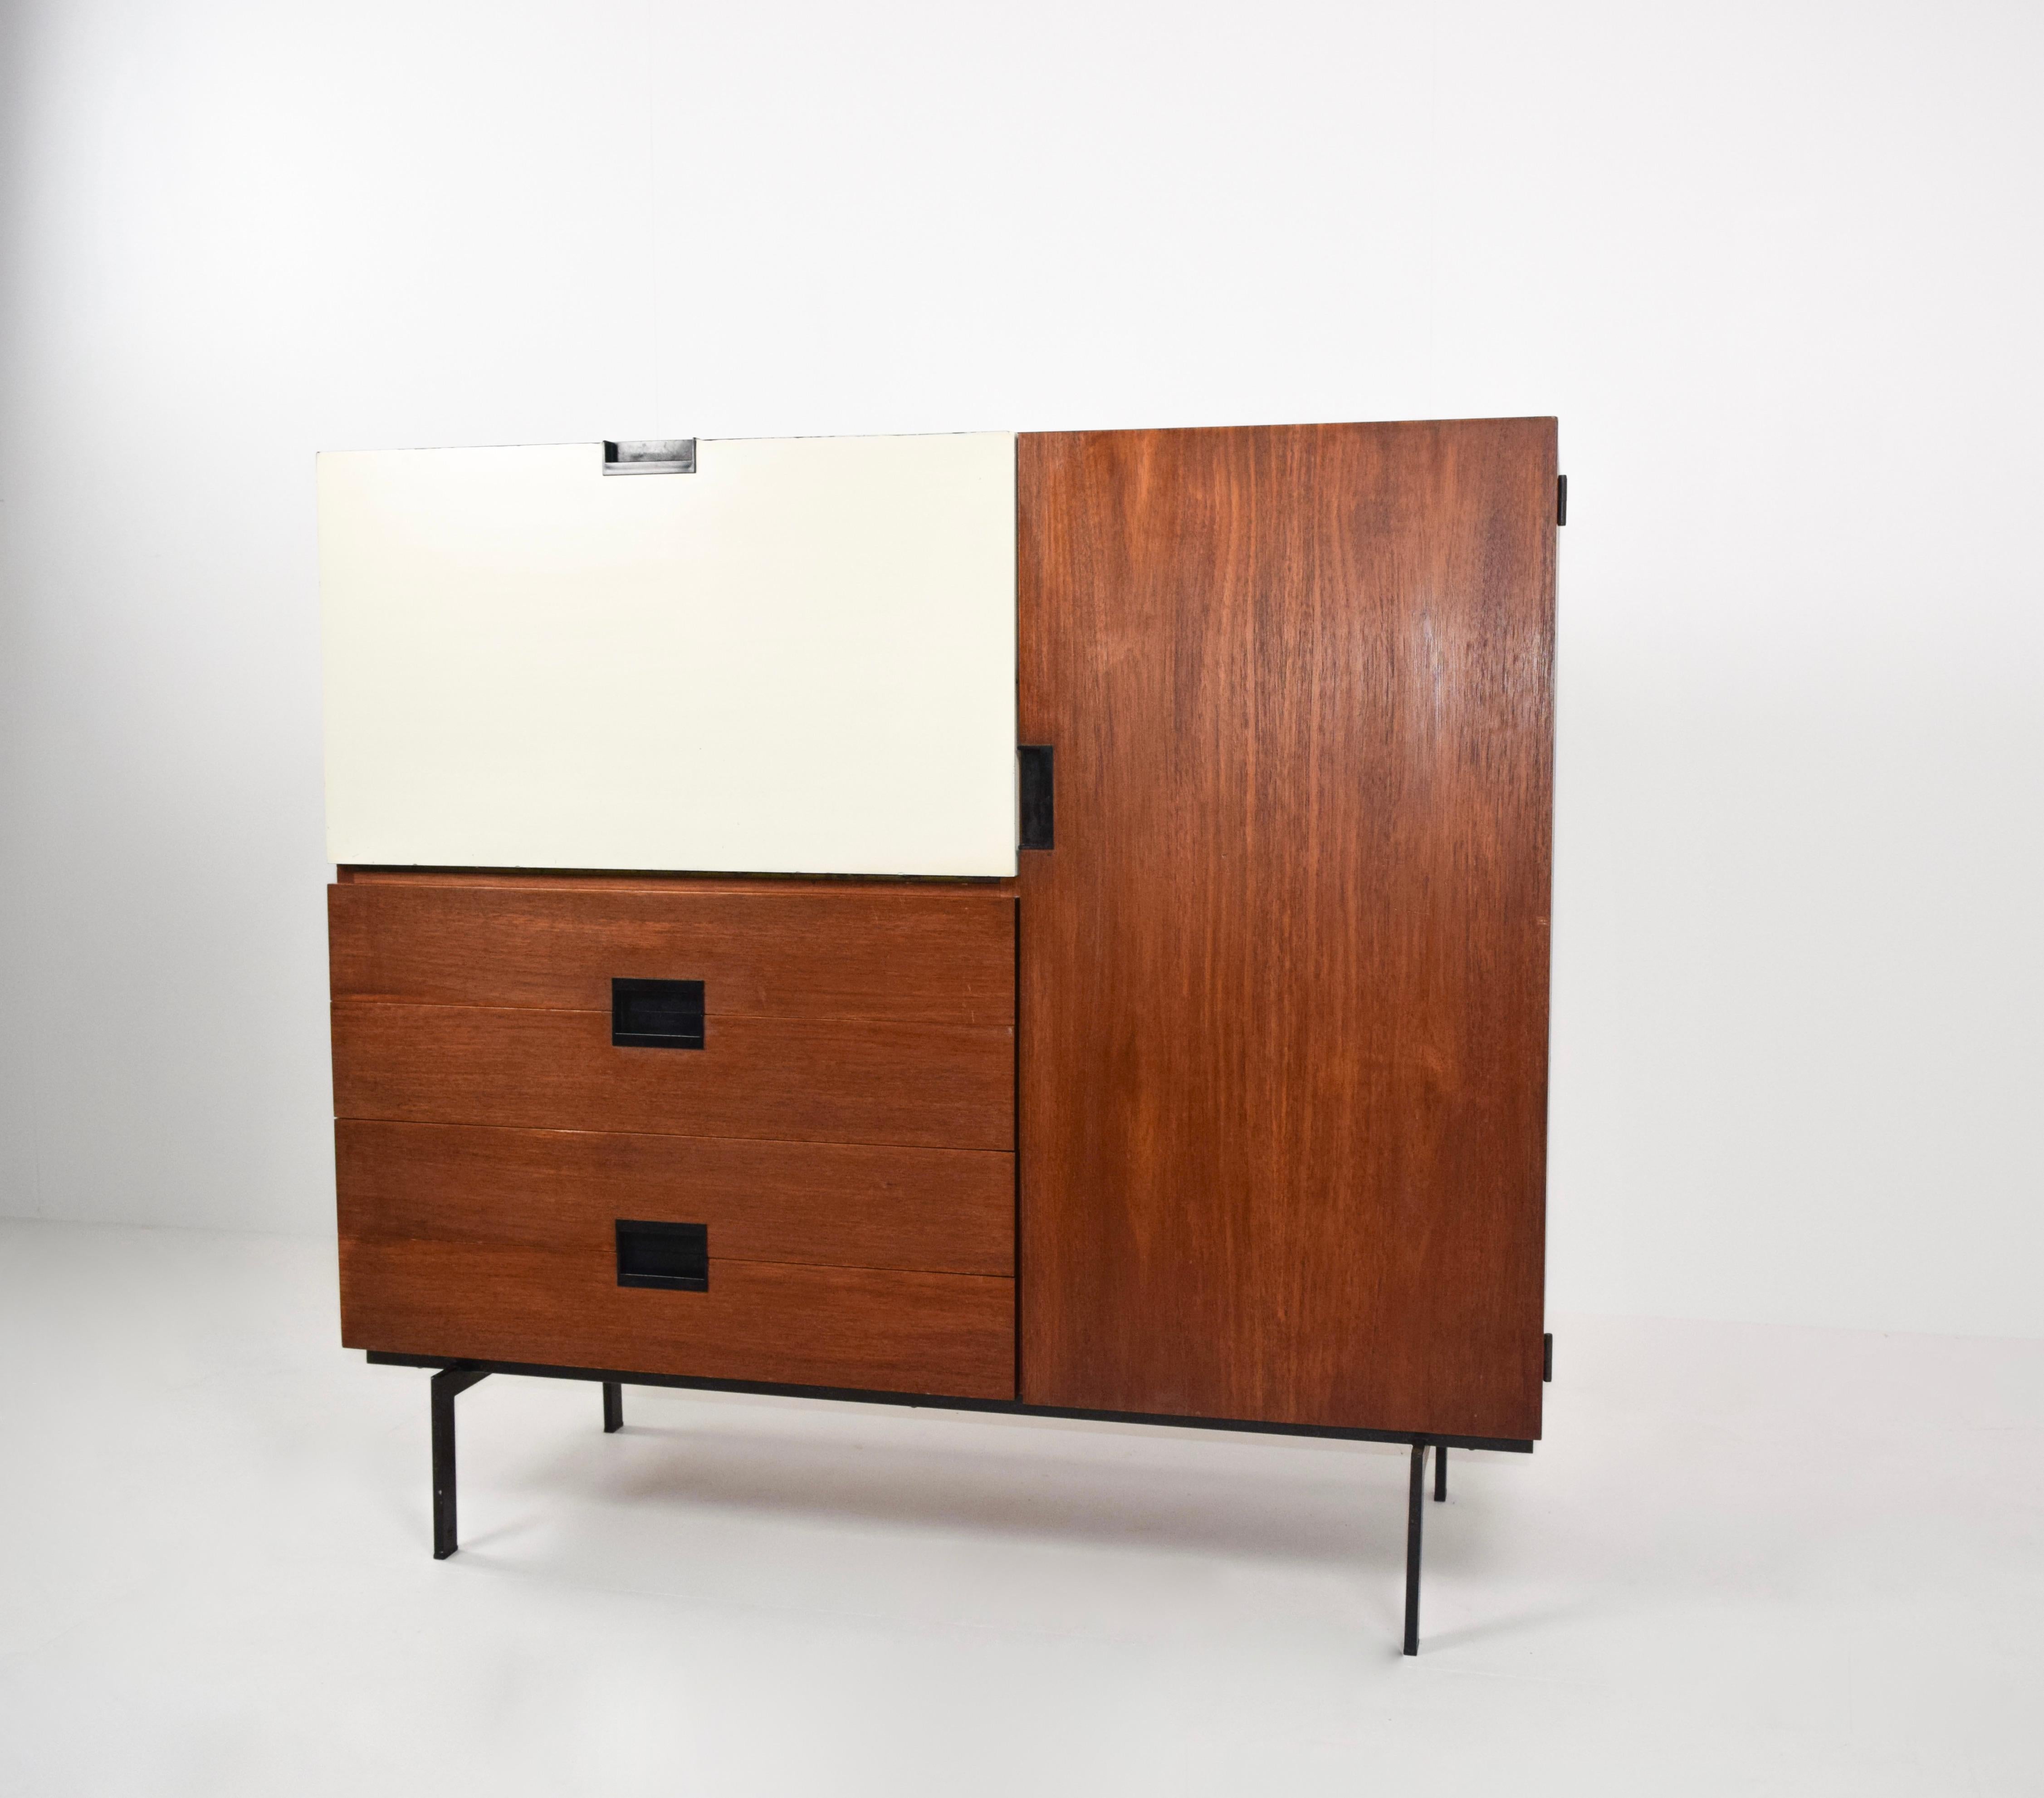 Dutch Highboard CU06 by Cees Braakman for Pastoe, Japan Series, The Netherlands 1960s